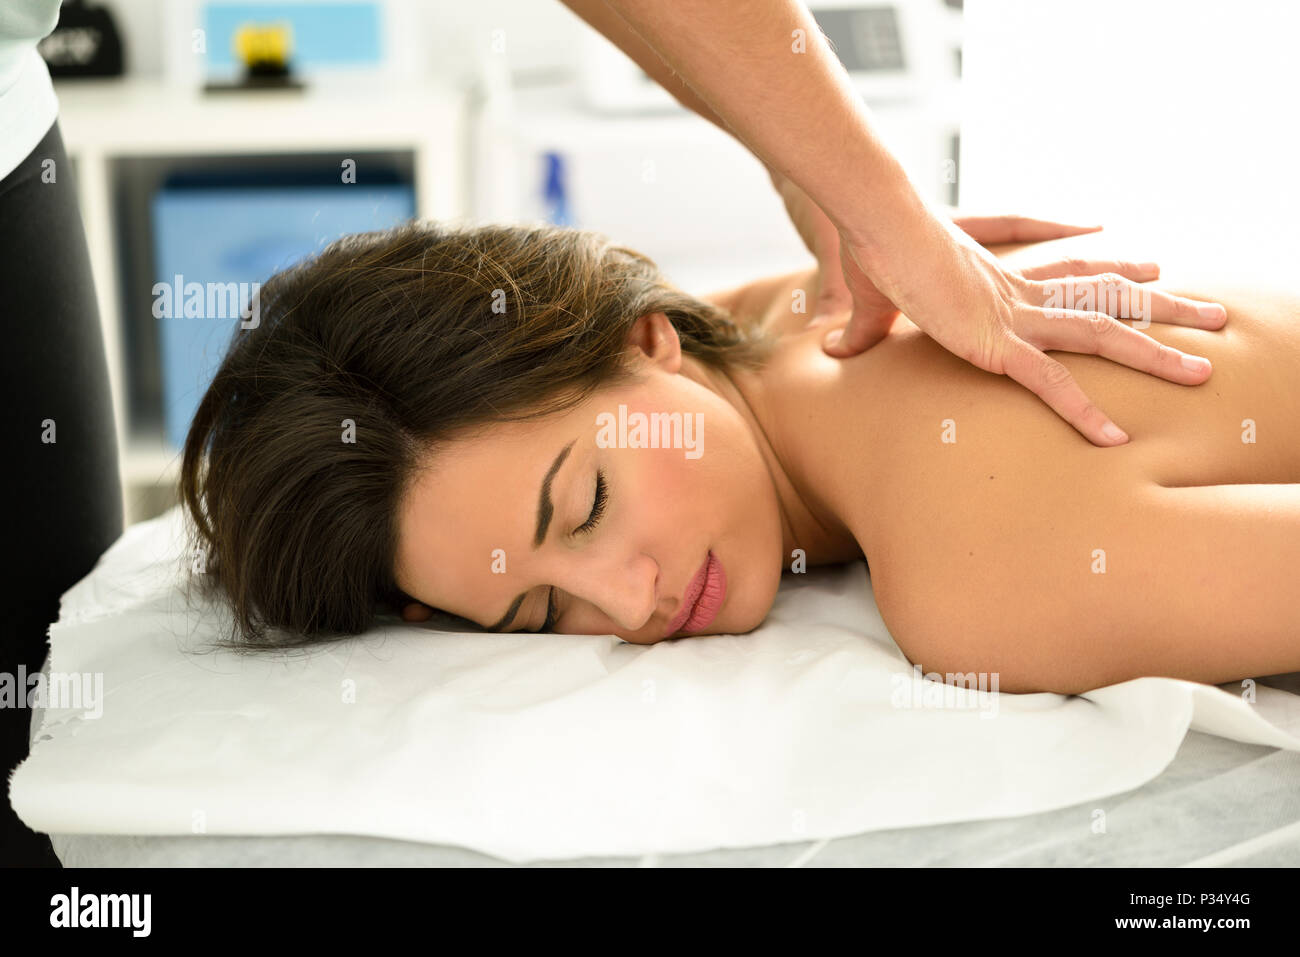 Young woman receiving a back massage in a spa center. Female patient is receiving treatment by professional therapist. Stock Photo